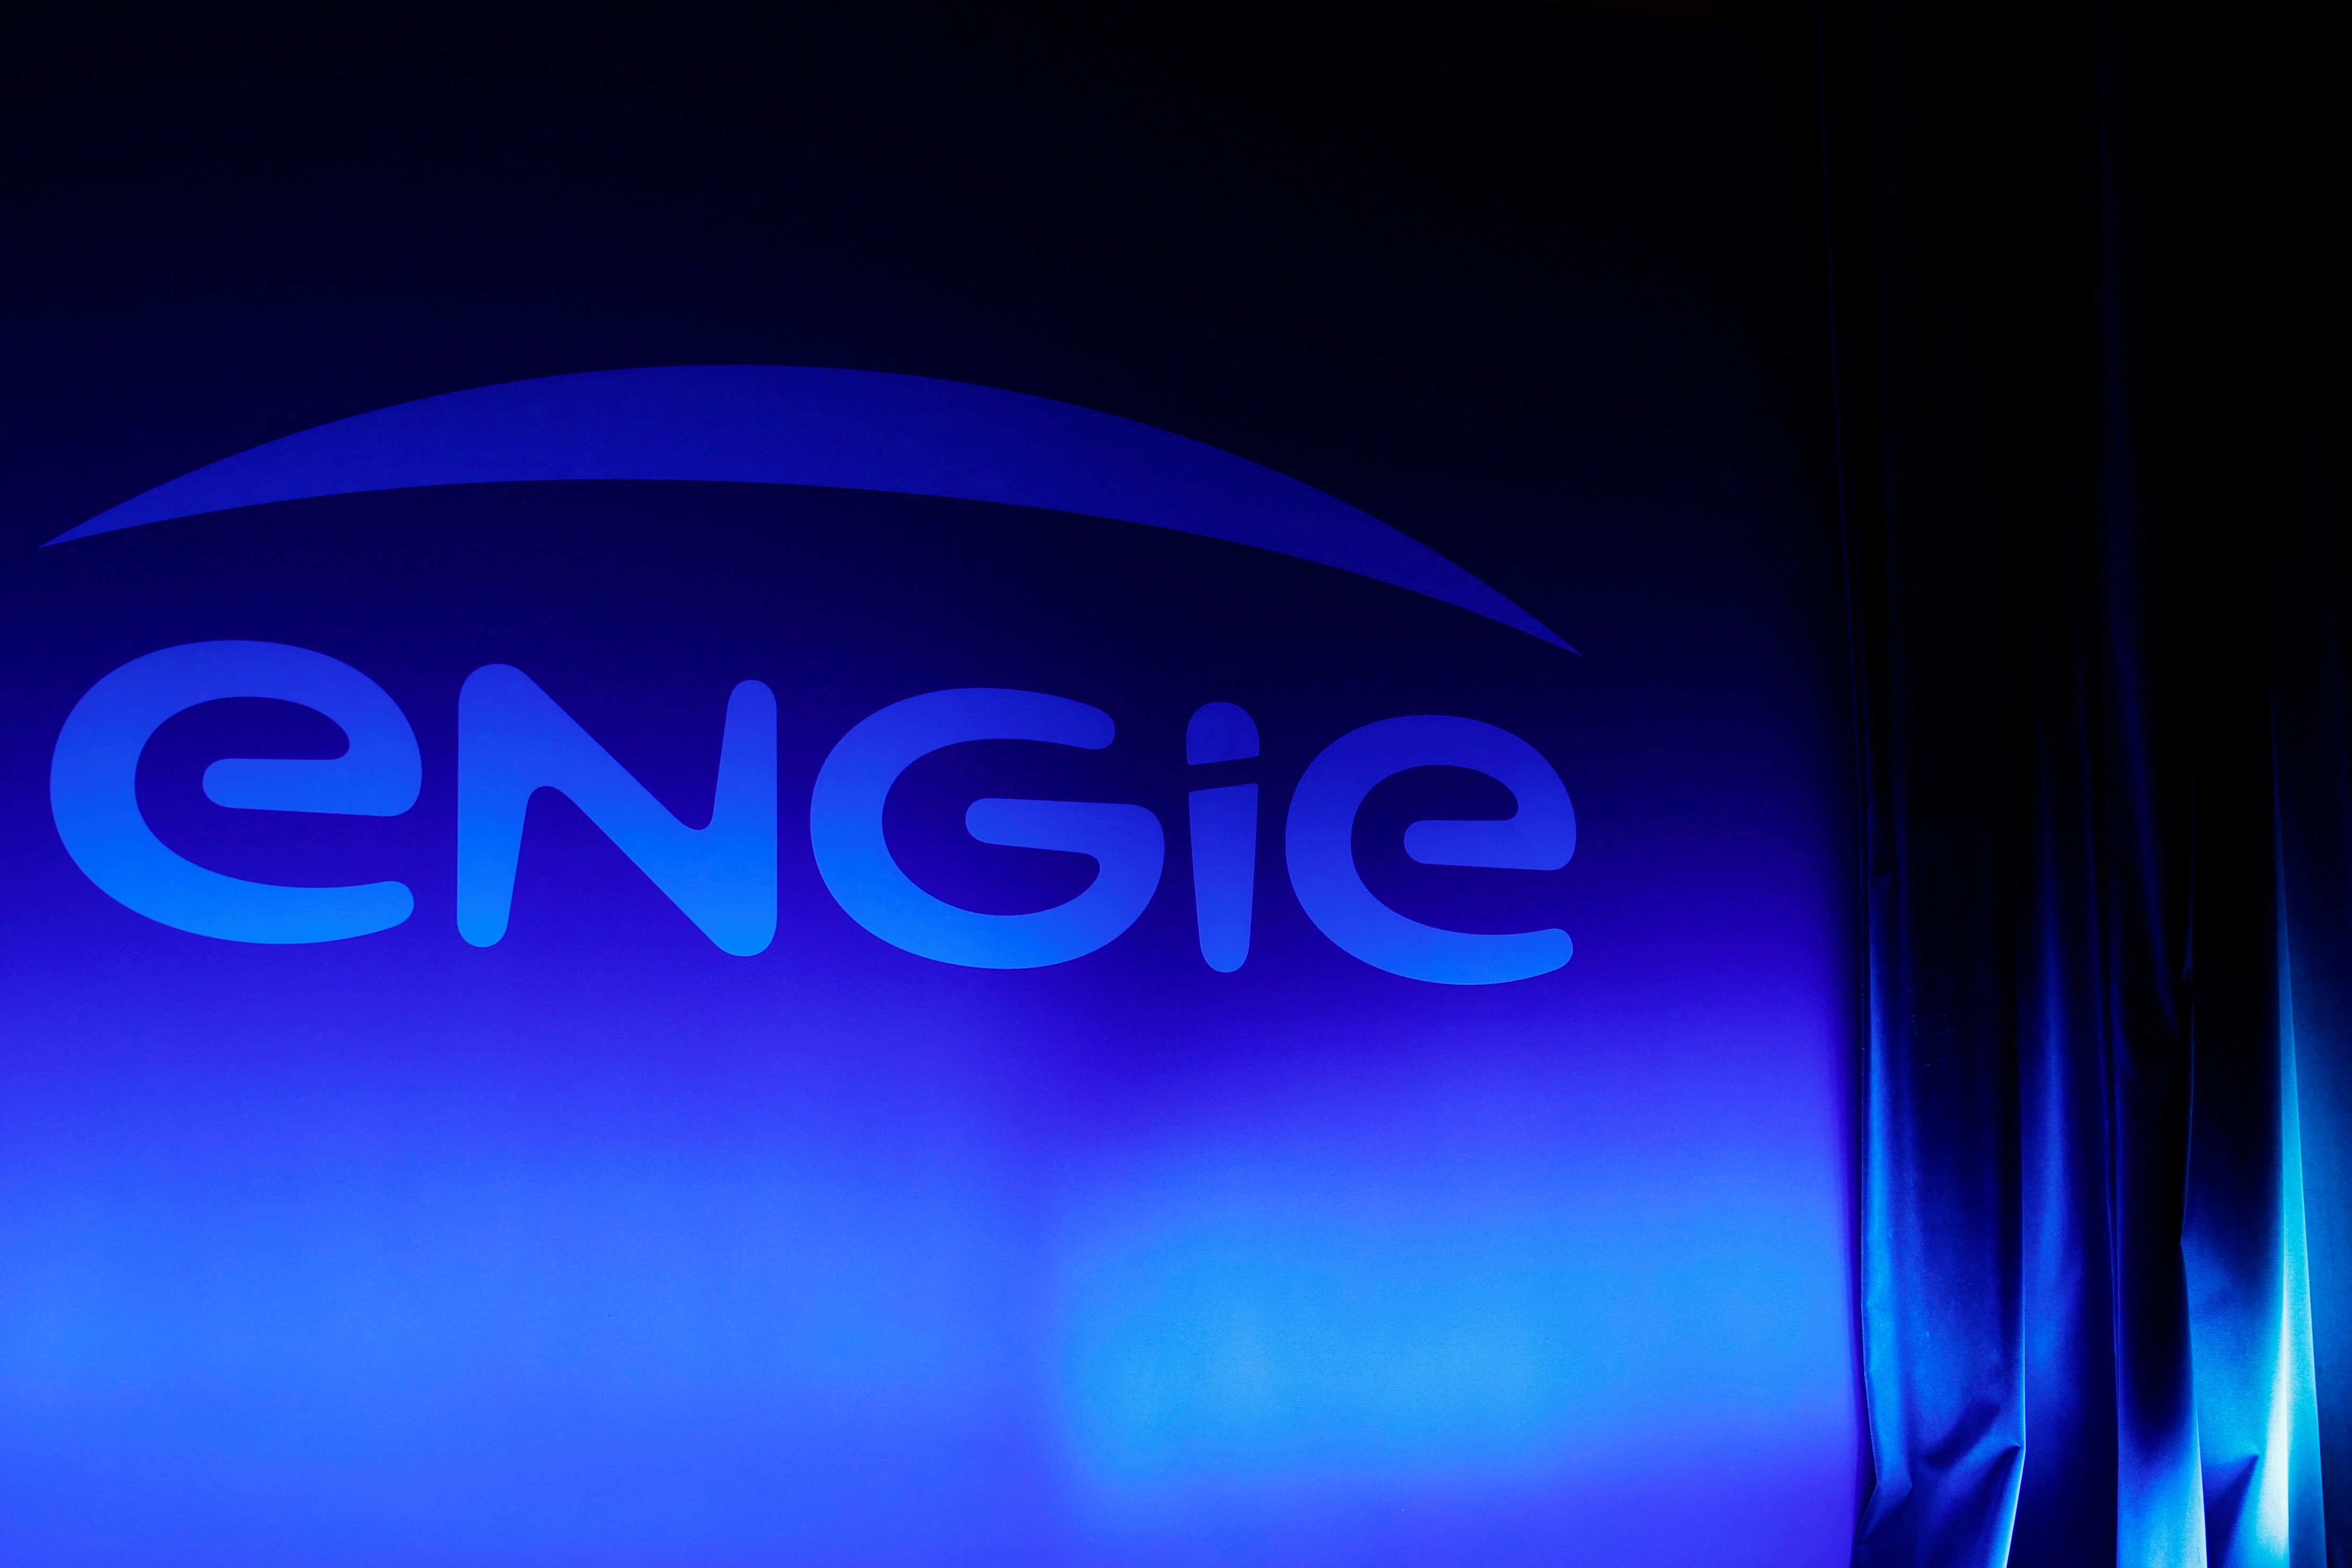 Engie holds annual shareholders meeting in Paris